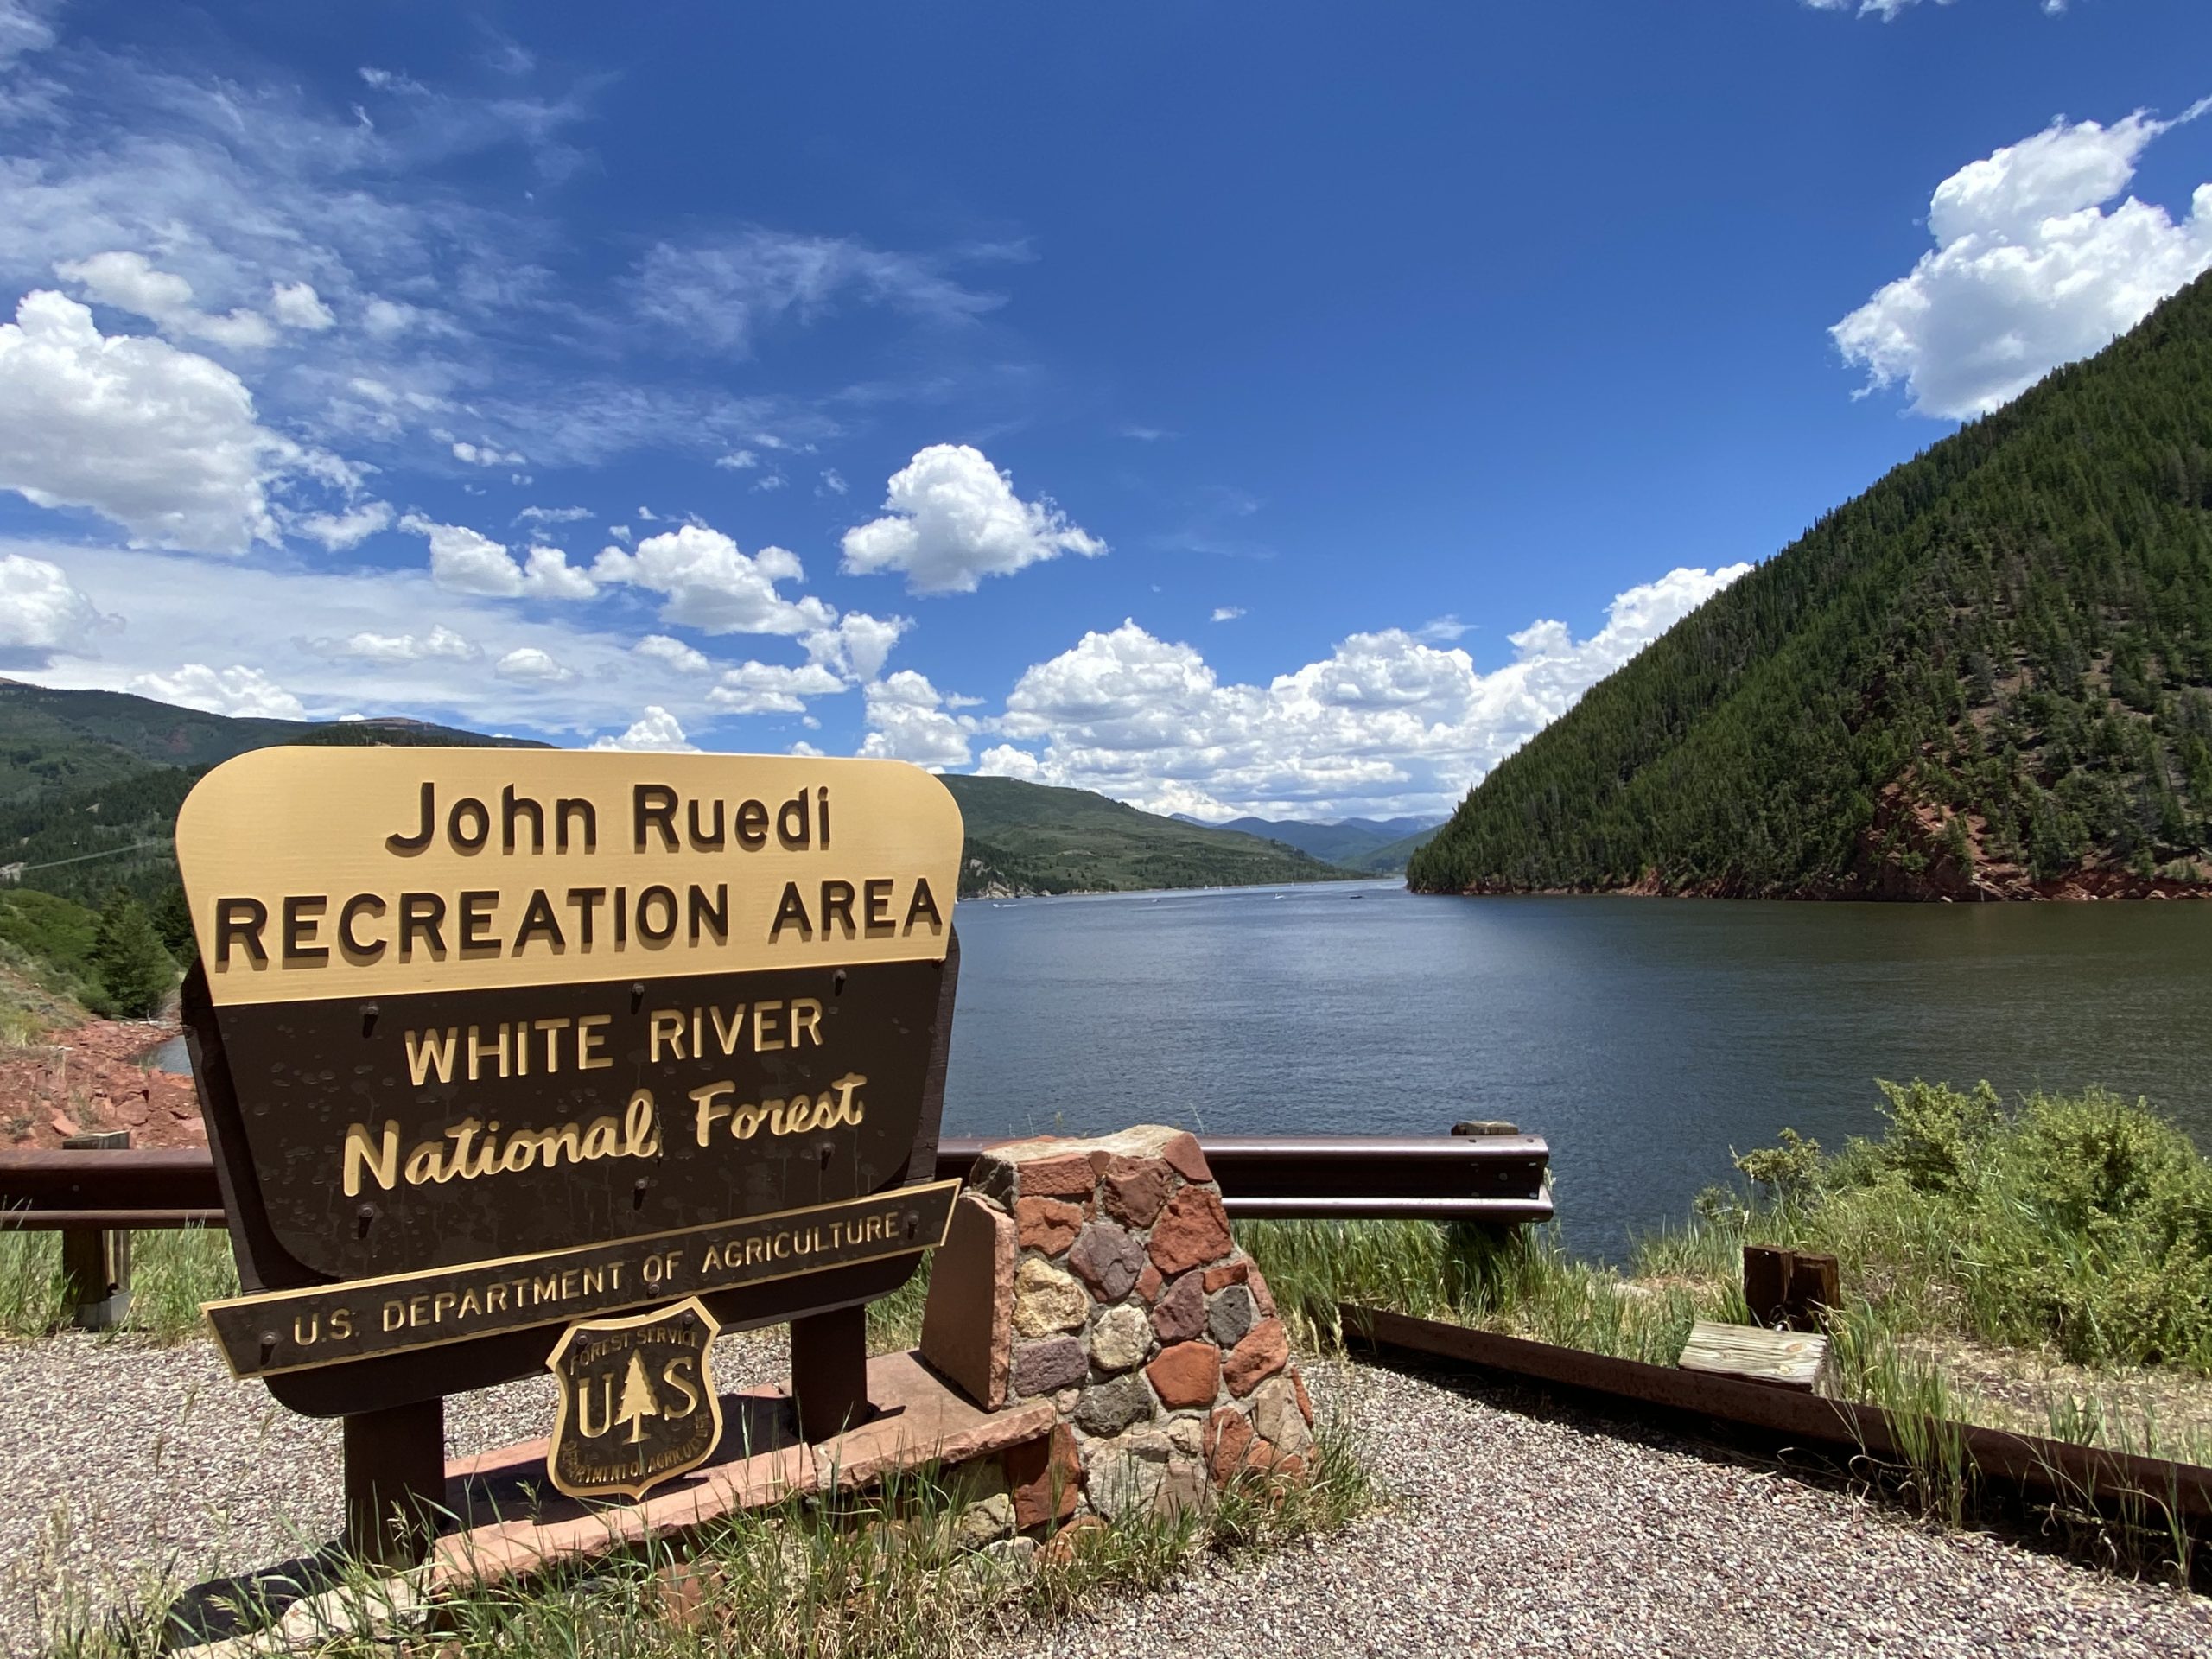 Ruedi reservoir with sign saying "John Ruedi Recreation Area White River National Forest"